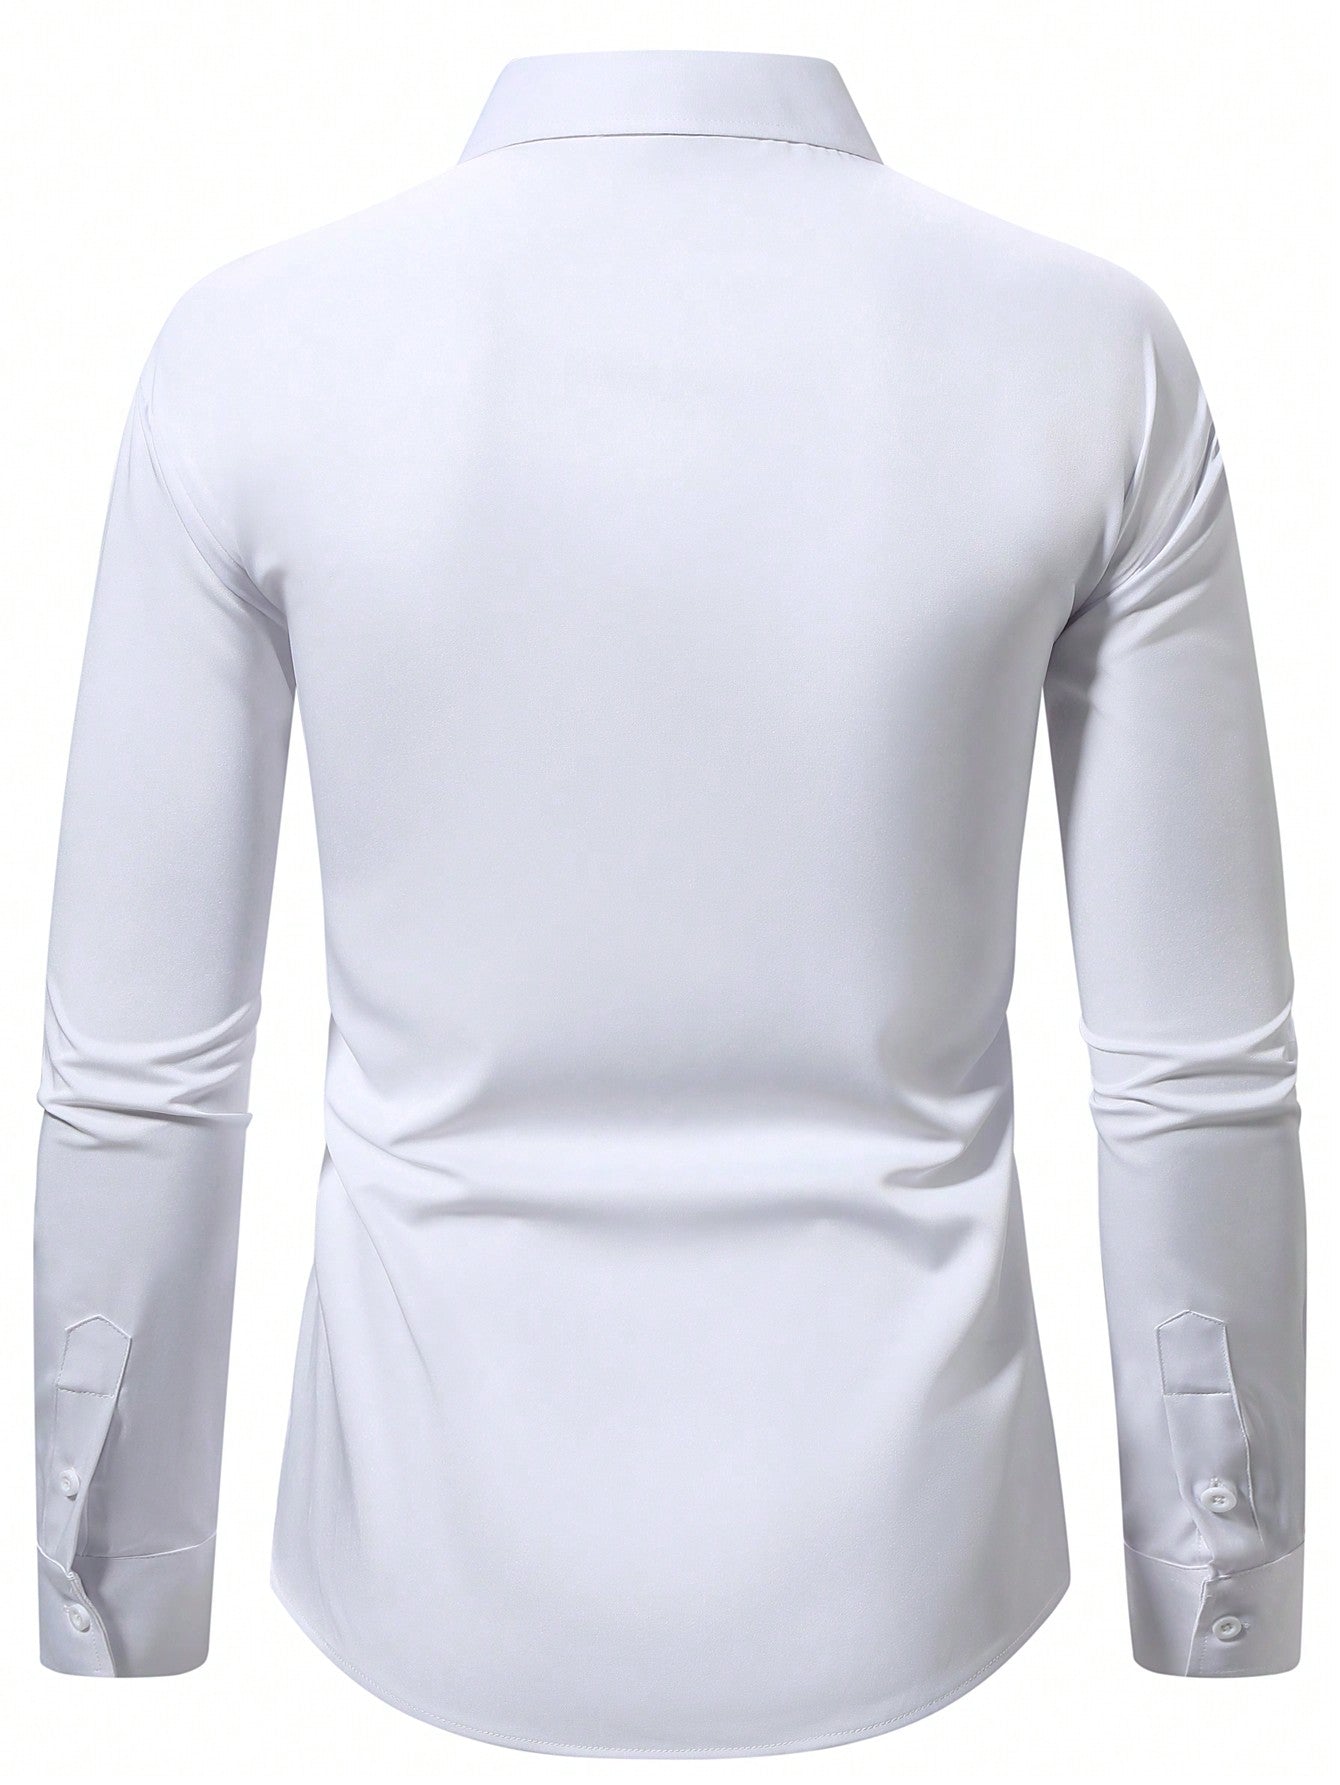 Manfinity Mode Men's Solid Color Long Sleeve Shirt